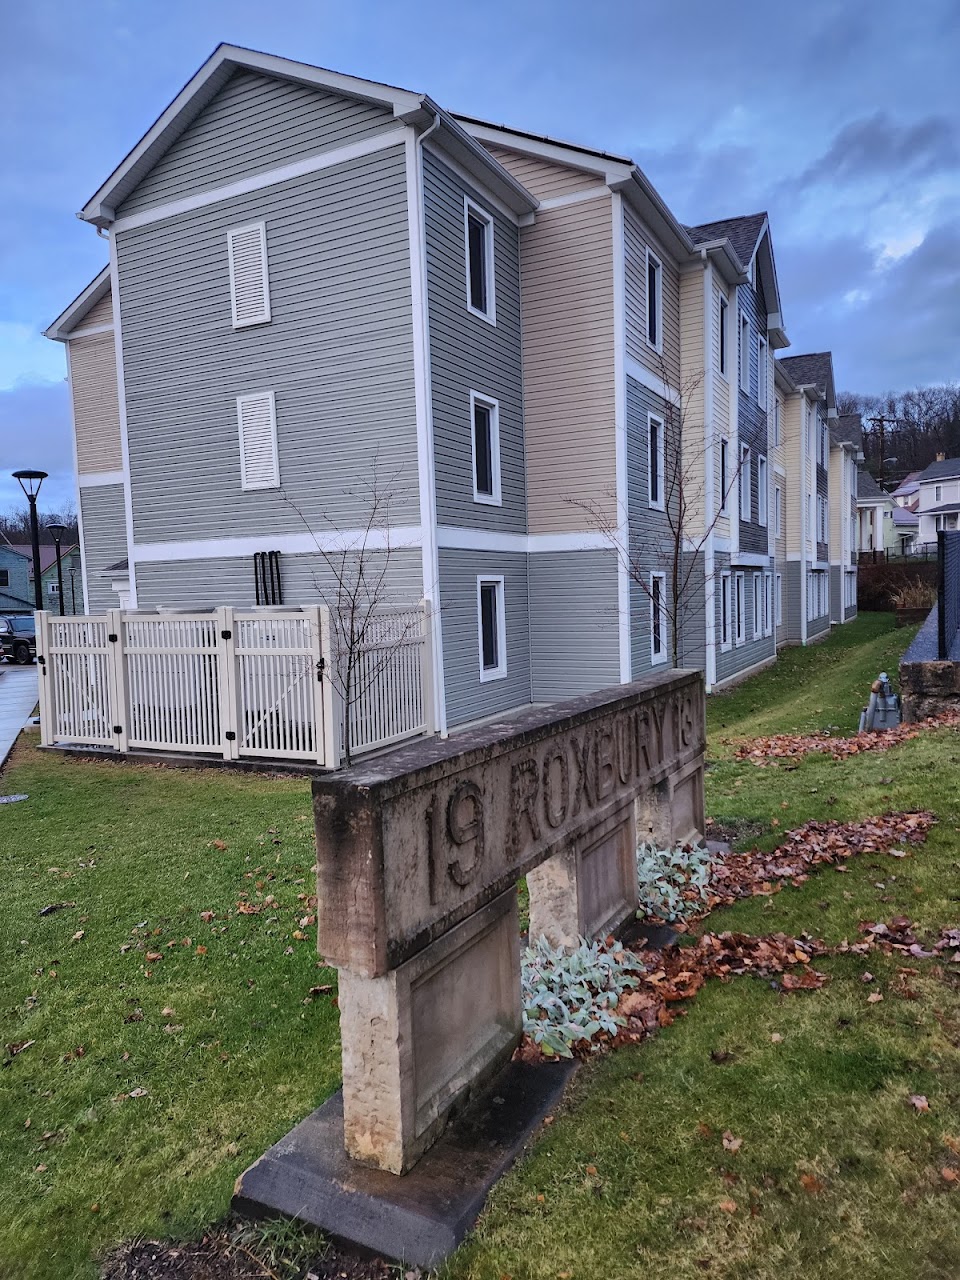 Photo of ROXBURY PLACE. Affordable housing located at 1308 FRANKLIN ST JOHNSTOWN, PA 15905